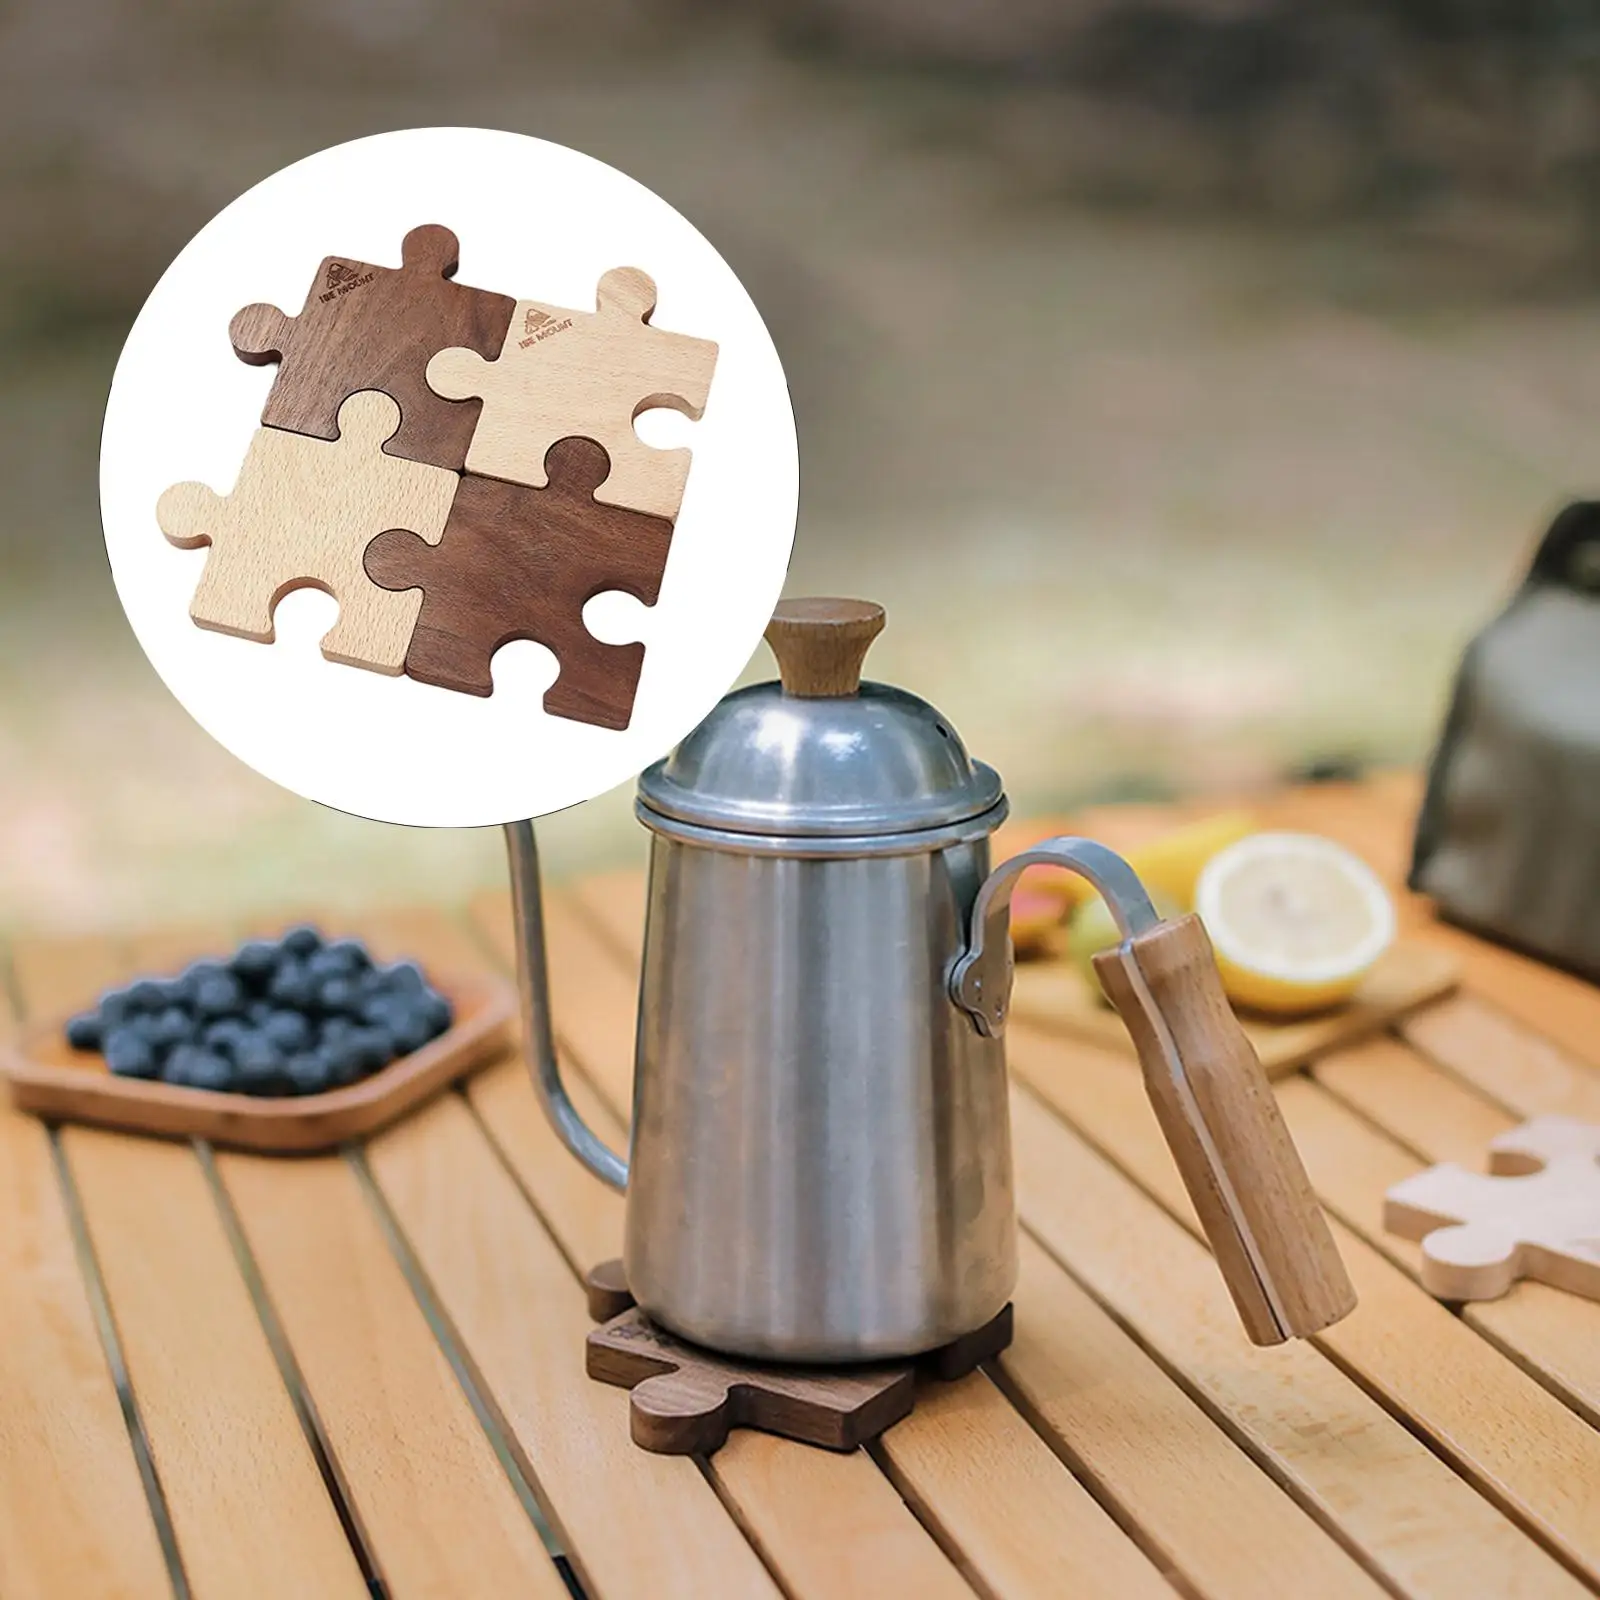 4Pcs Wooden Coasters Jigsaw Puzzle Design Walnut Wood Beech Wood Durable Reusable Drinkware Tea Cup Pad for Office Dining Room